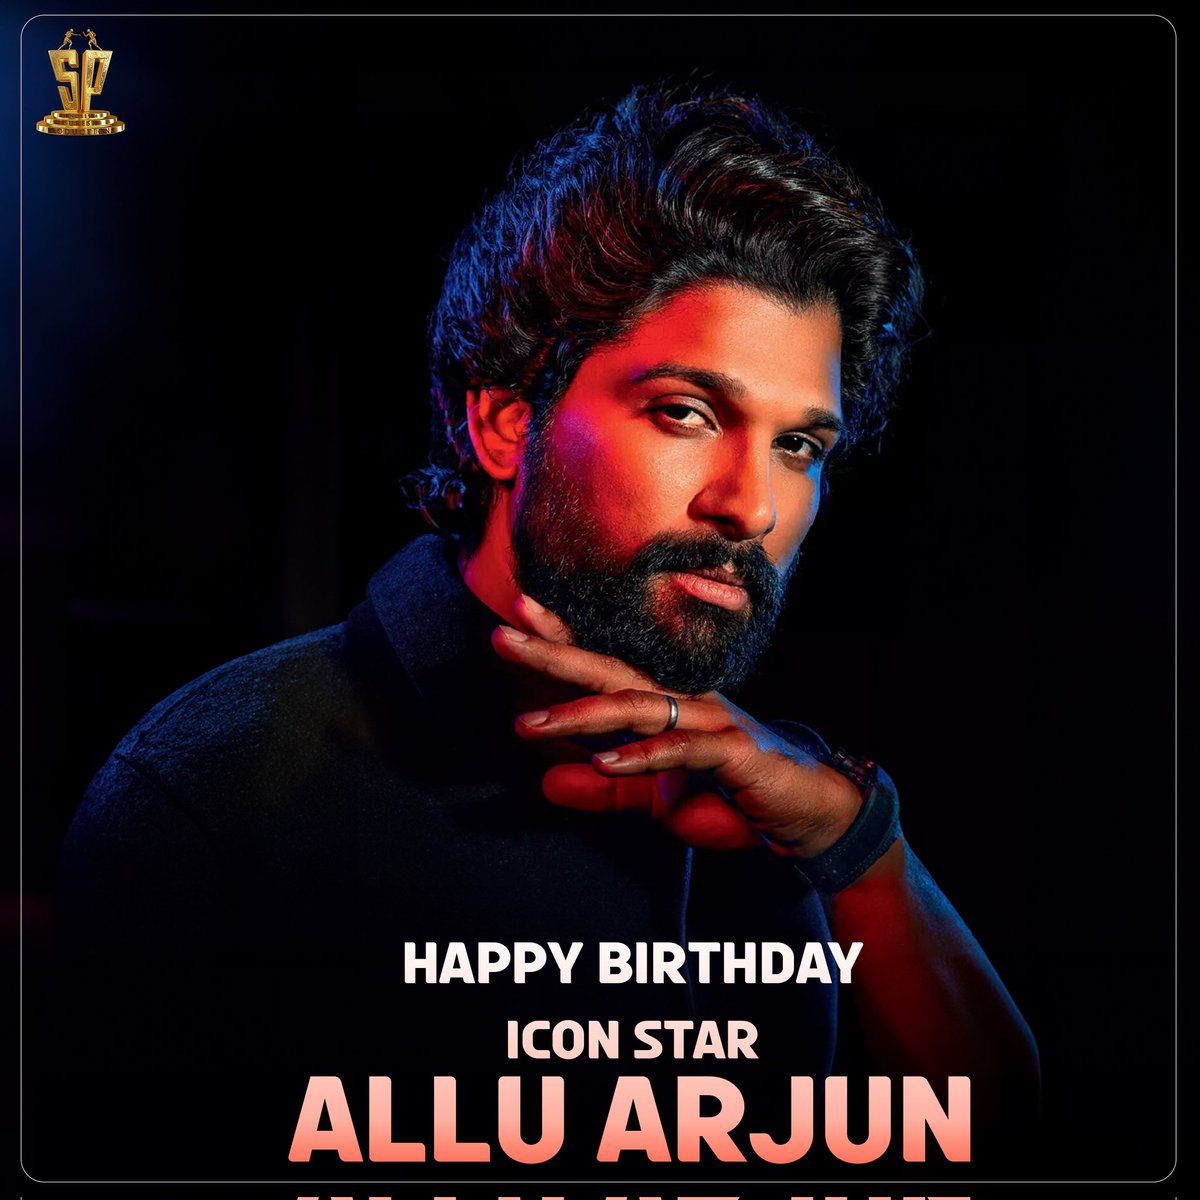 Wishing the actor par excellence and our very own Icon Star @alluarjun a very Happy Birthday and a Blockbuster year ahead! #HBDAlluArjun #HBDIconStarAlluArjun